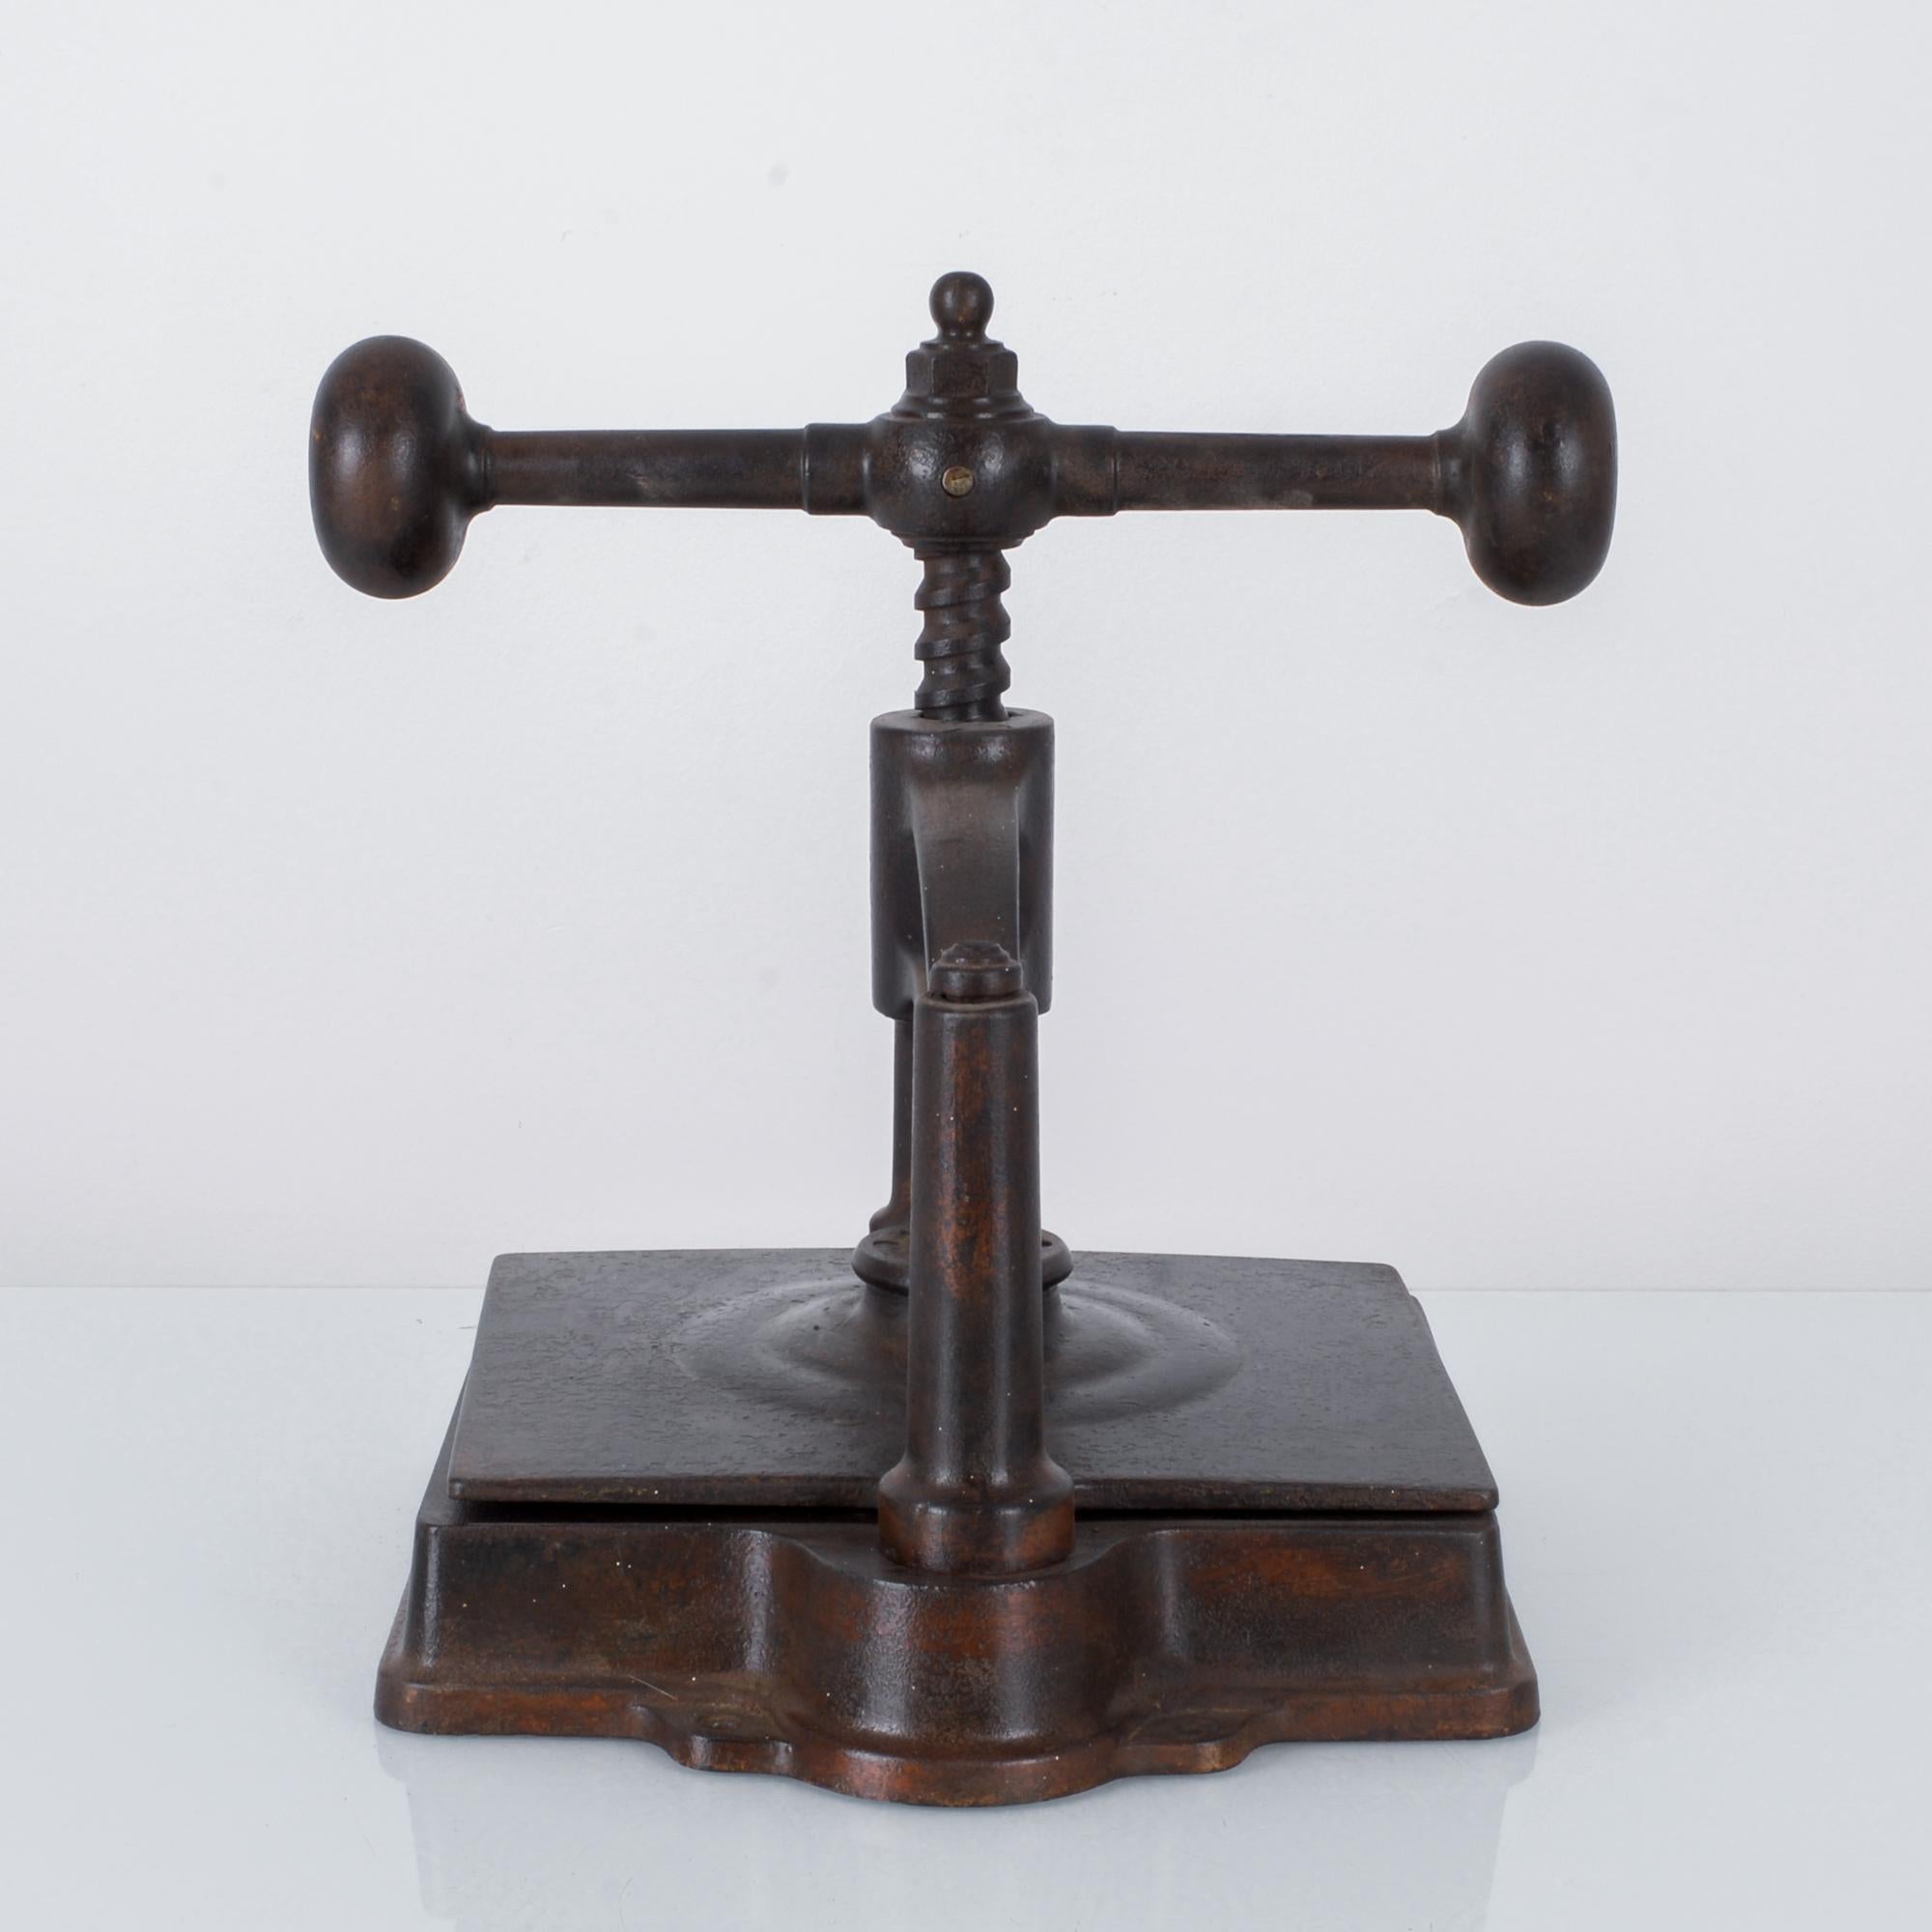 This cast iron book press with a rich patina was made in France. From the 18th-early 20th century, press machines such as this were used in offices to make copies of letters that were sent out. This press features a T-bar with rounded ends and a